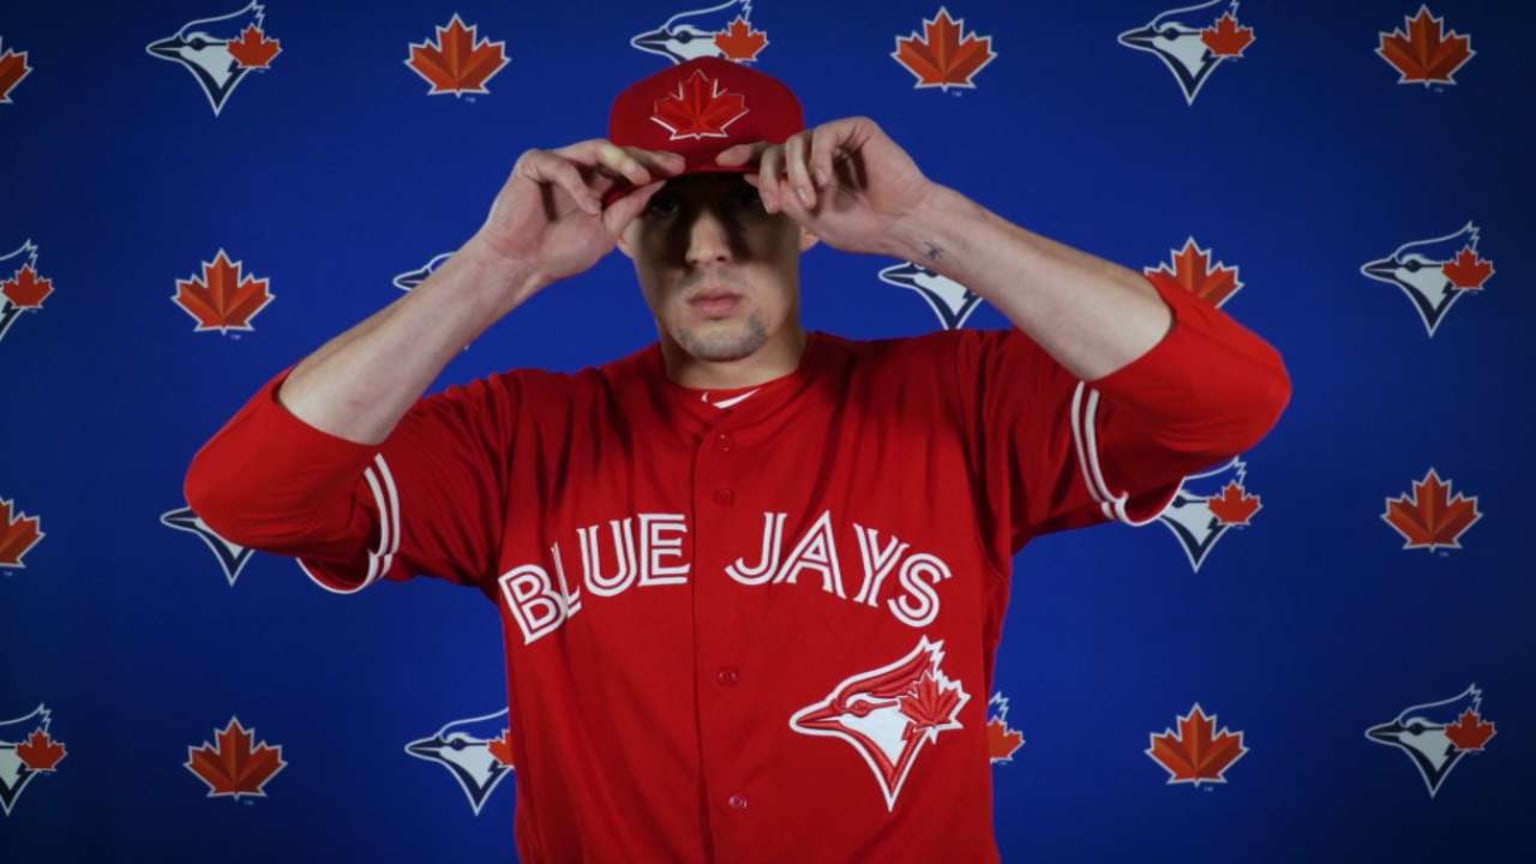 Blue Jays Official 2021 MLB Jersey in Blue